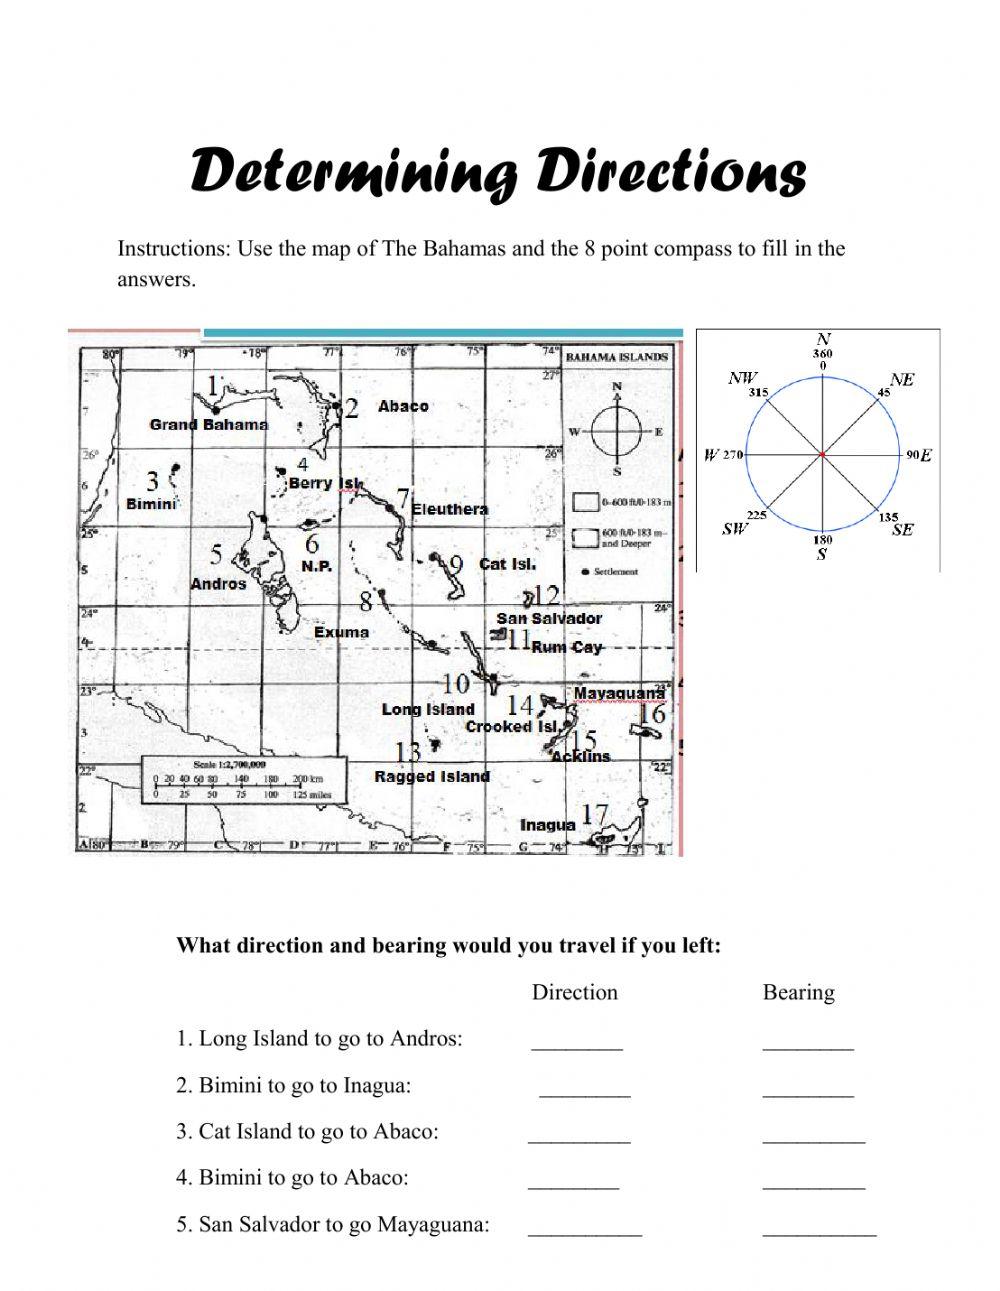 Directions and Bearings